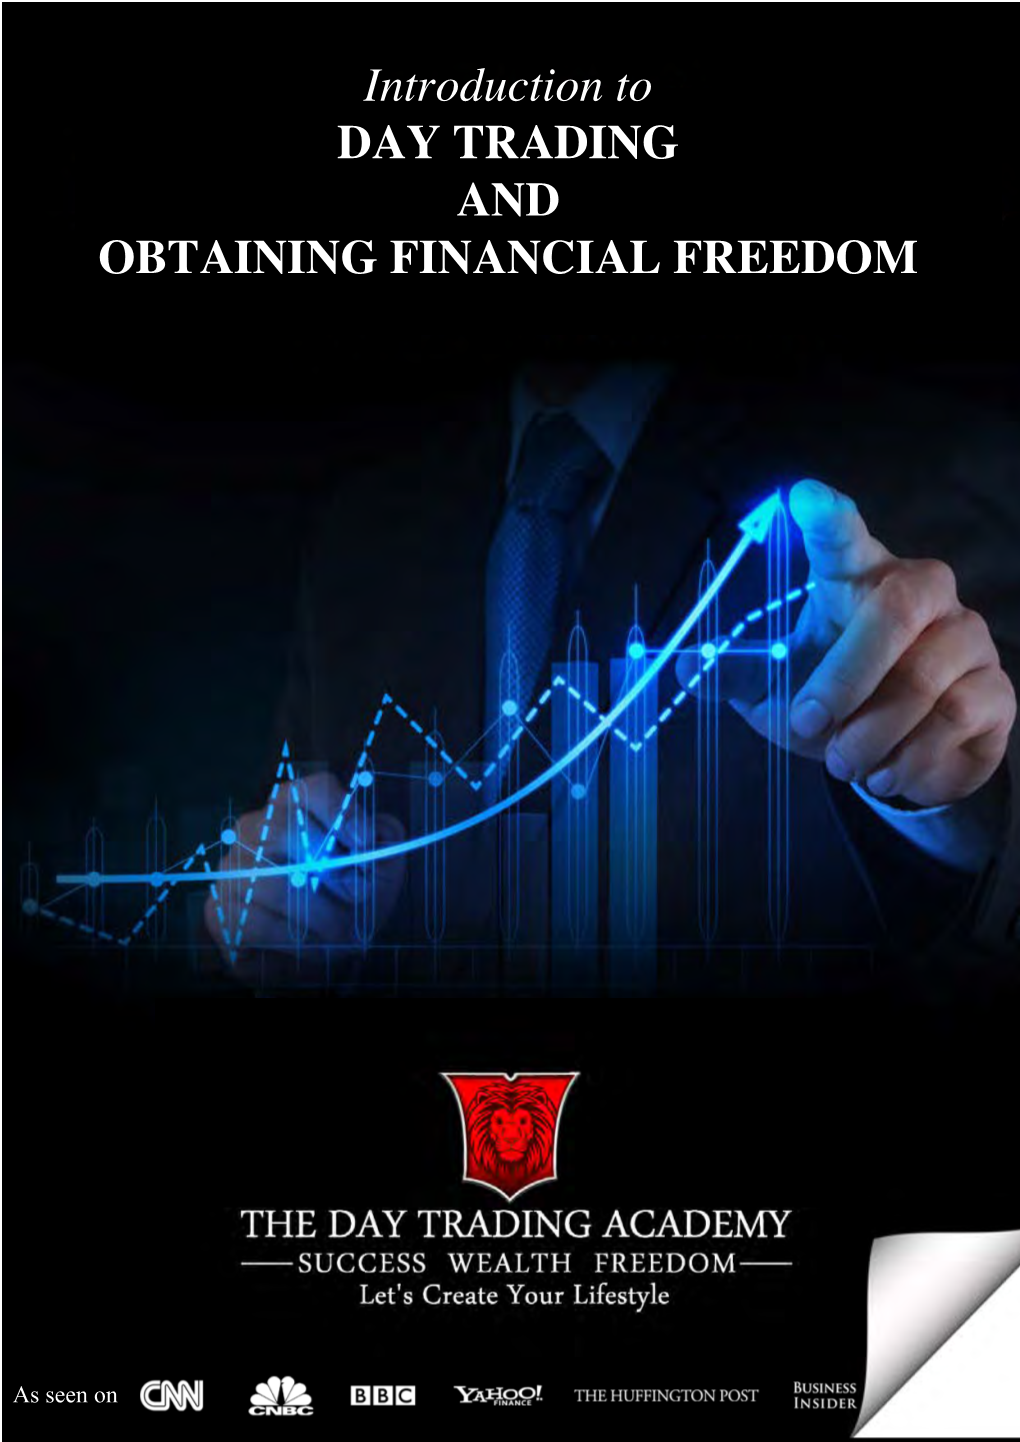 Introduction to DAY TRADING and OBTAINING FINANCIAL FREEDOM